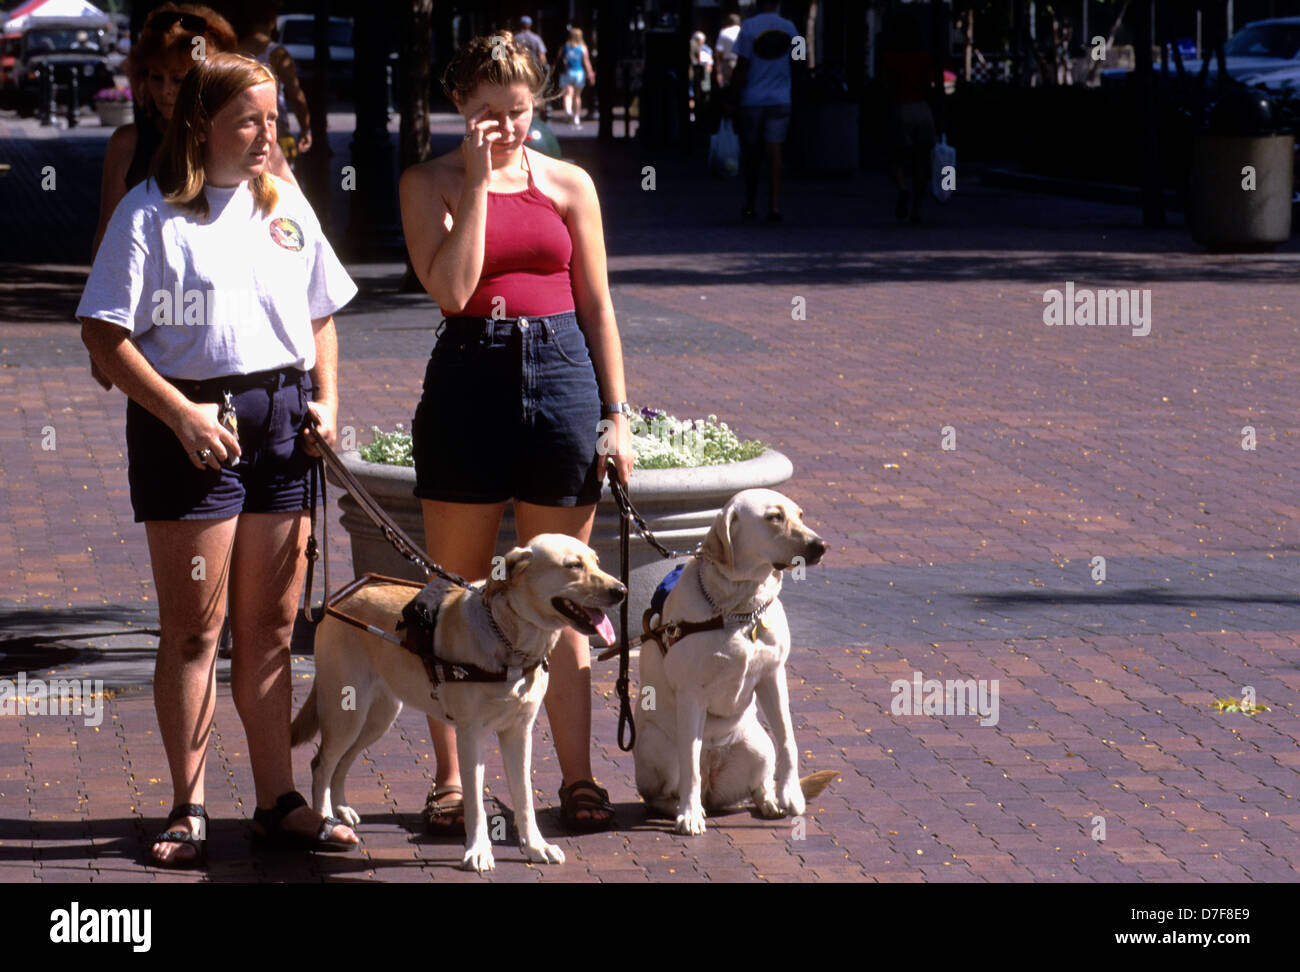 Two visually-impaired women with guide dogs in downtown Boise Idaho Stock Photo